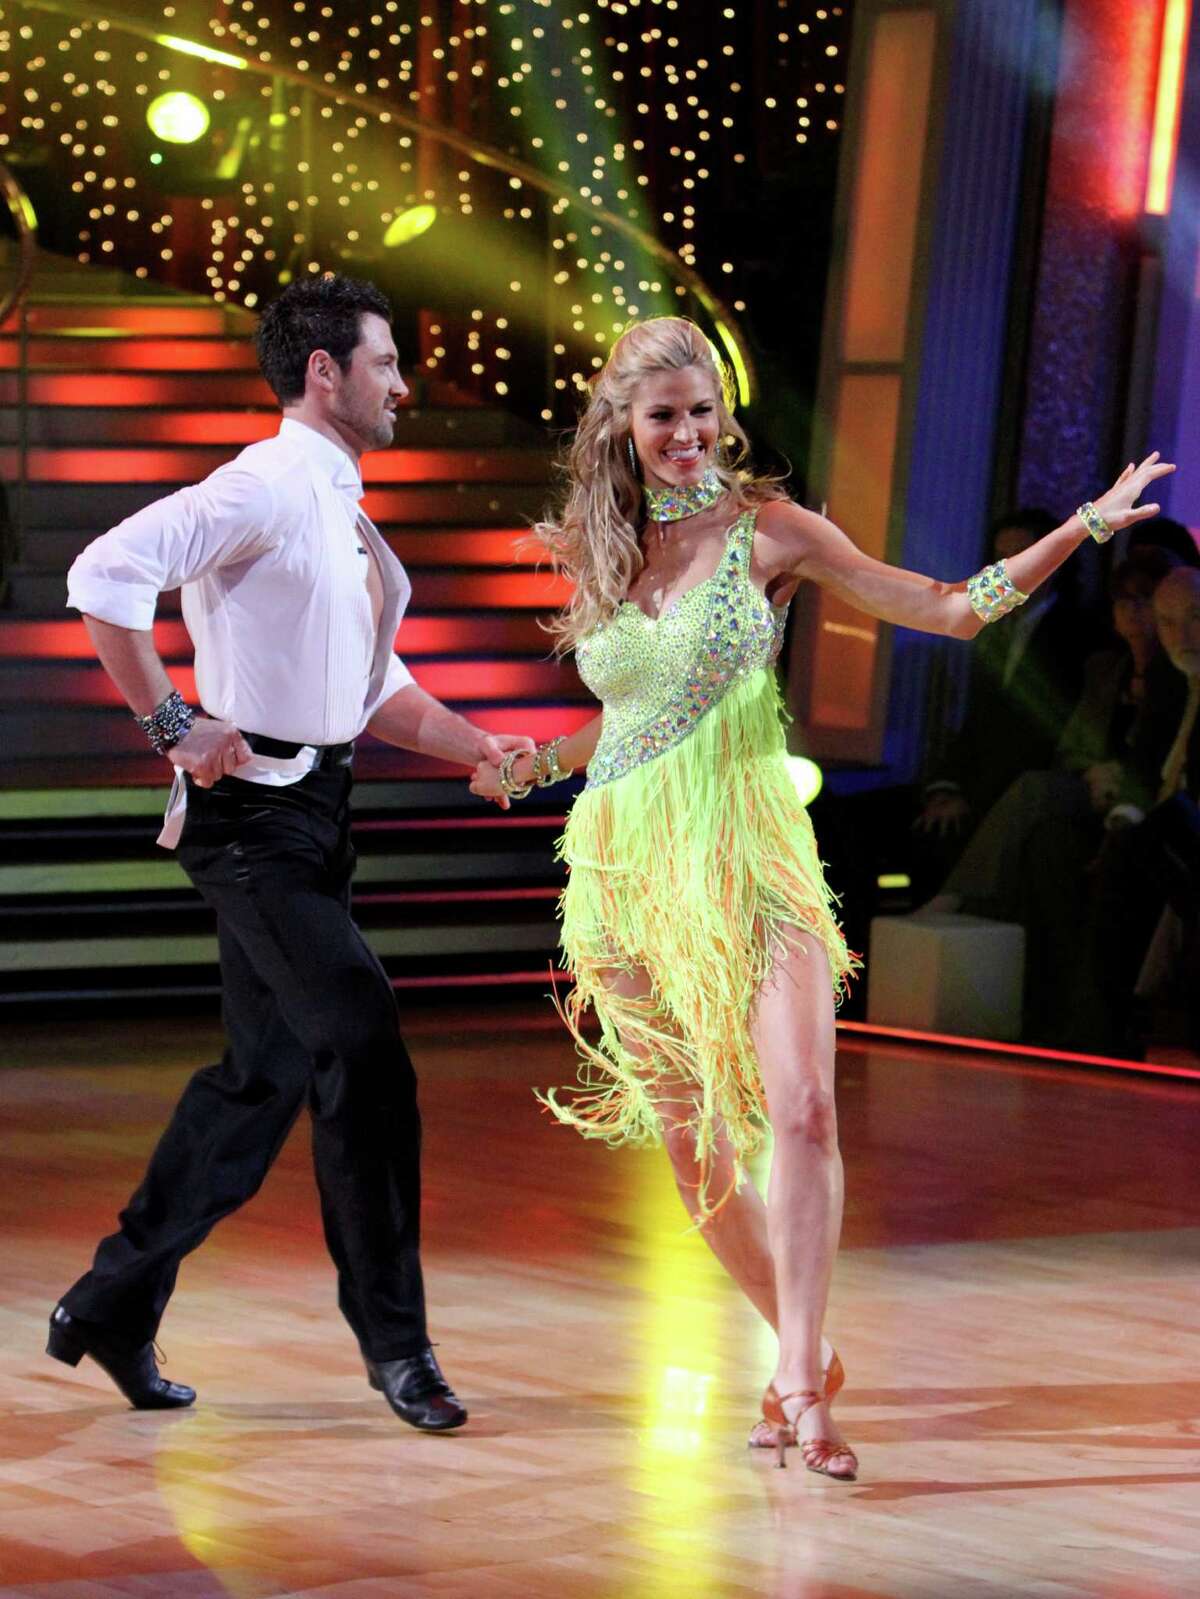 In this publicity image released by ABC, ESPN sportscaster Erin Andrews, right, and her partner Maksim Chmerkovskiy perform on the celebrity dance competition series, "Dancing With the Stars," Monday, March 22, 2010 in Los Angeles. (AP Photo/ABC, Adam Larkey)